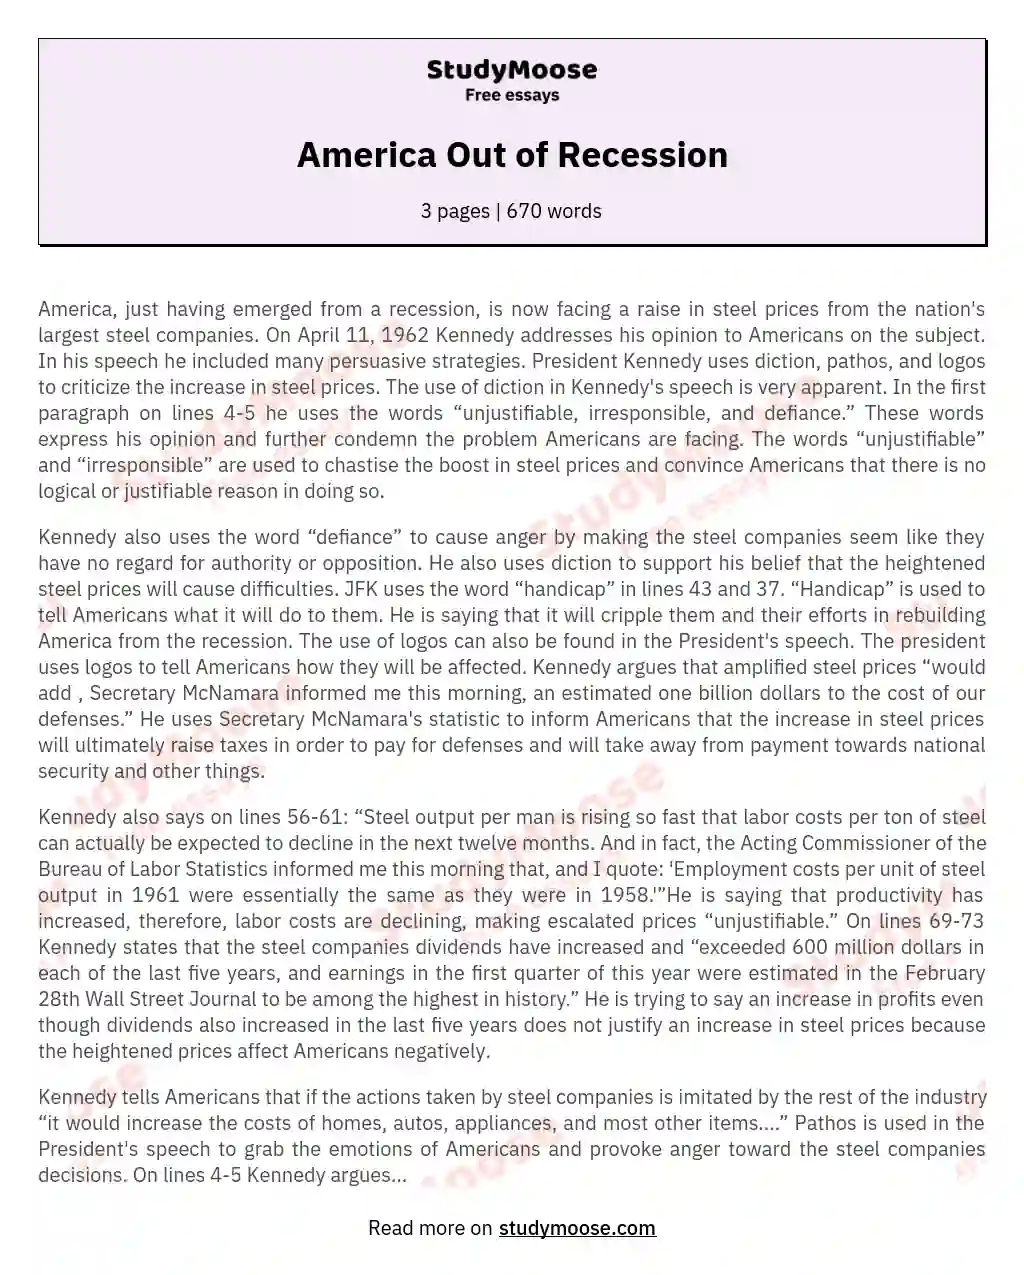 America Out of Recession essay